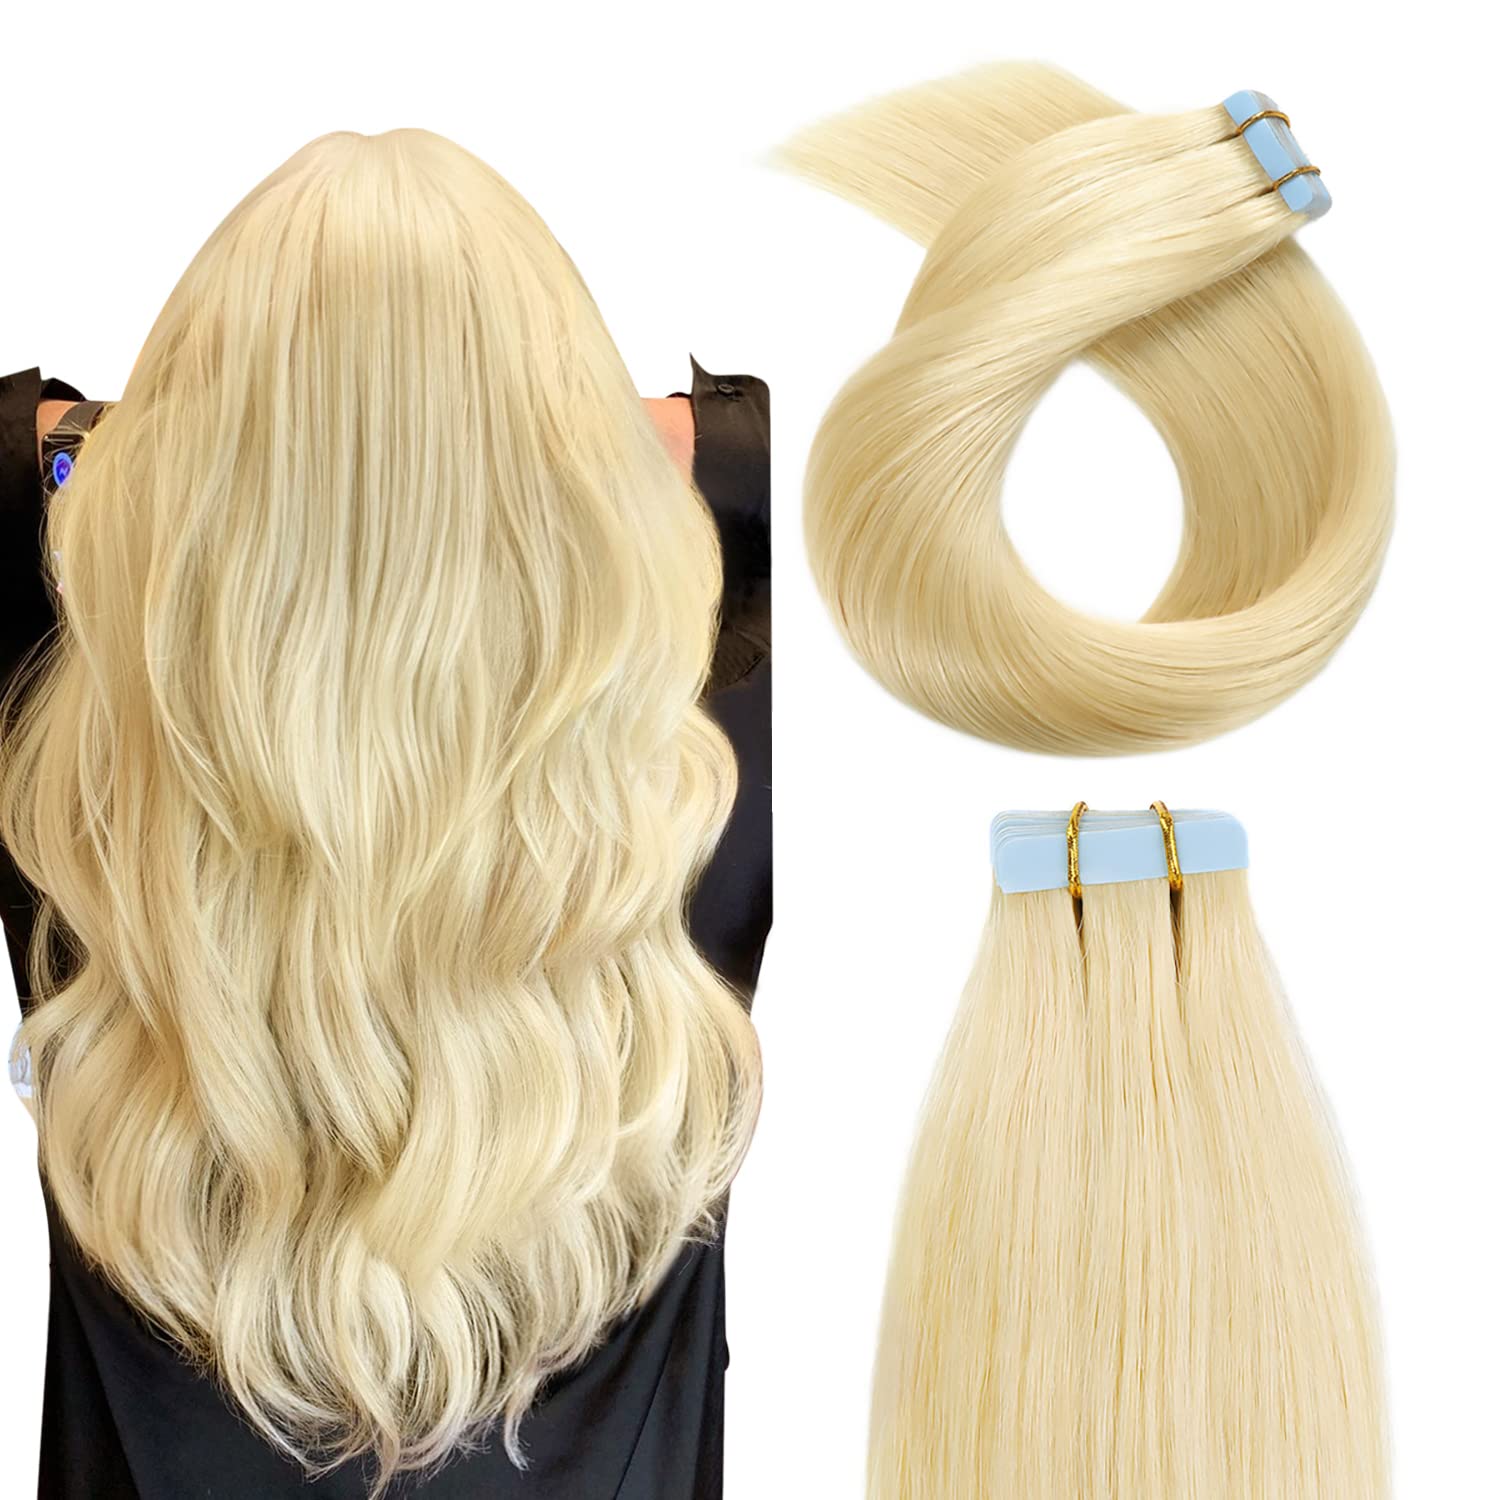 YILITE Tape in Hair Extensions Human Hair 12 inch-24 inch 20pcs 50g Silky Straight Tape in Human Hair Extensions Bleach Blonde Color Tape in Extensions